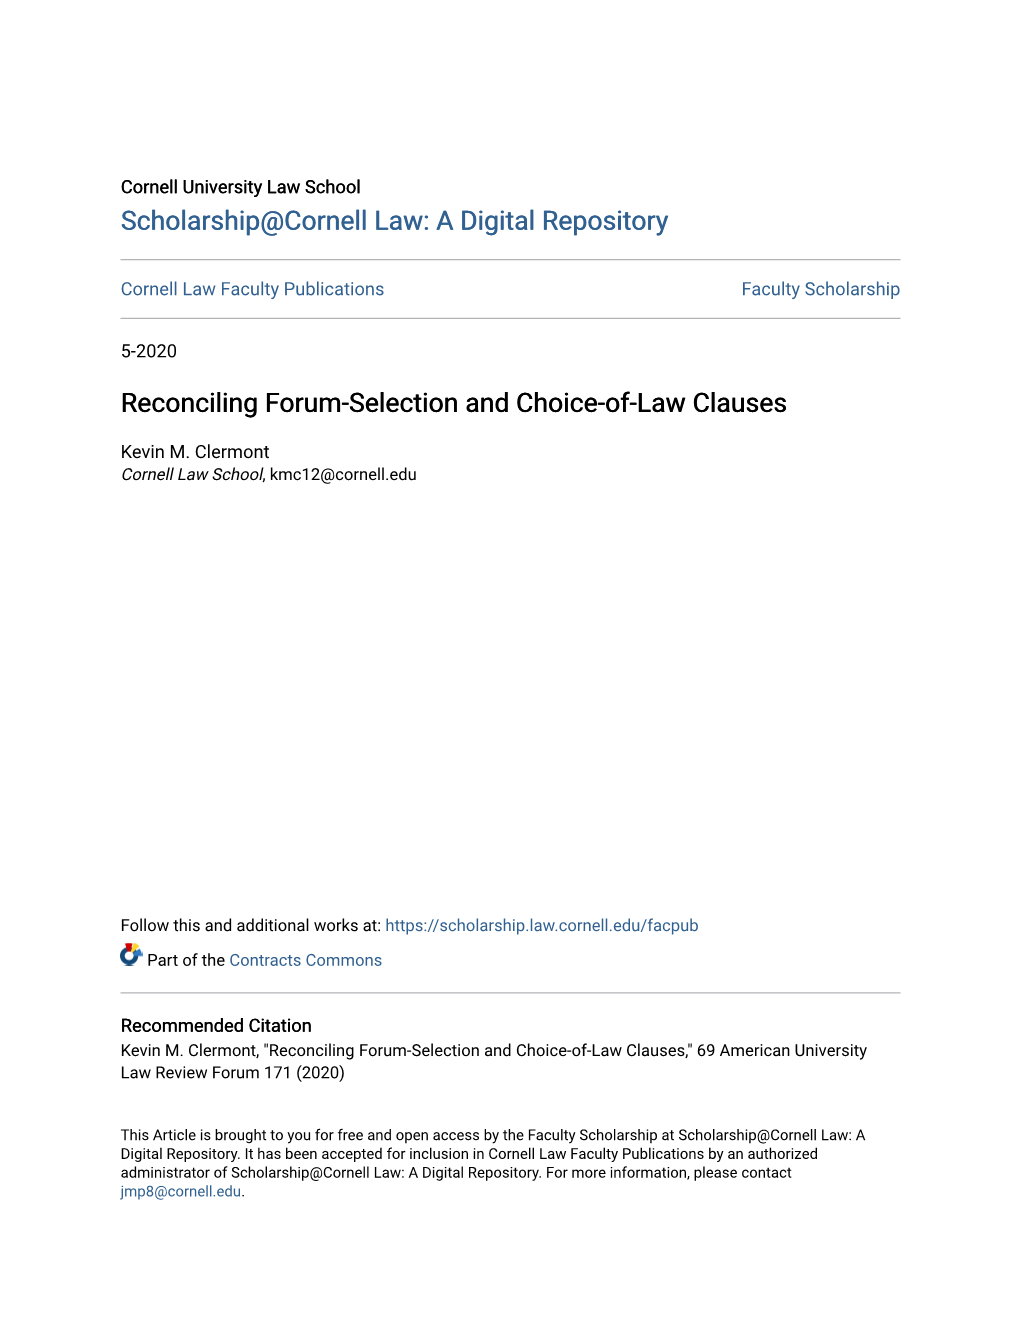 Reconciling Forum-Selection and Choice-Of-Law Clauses